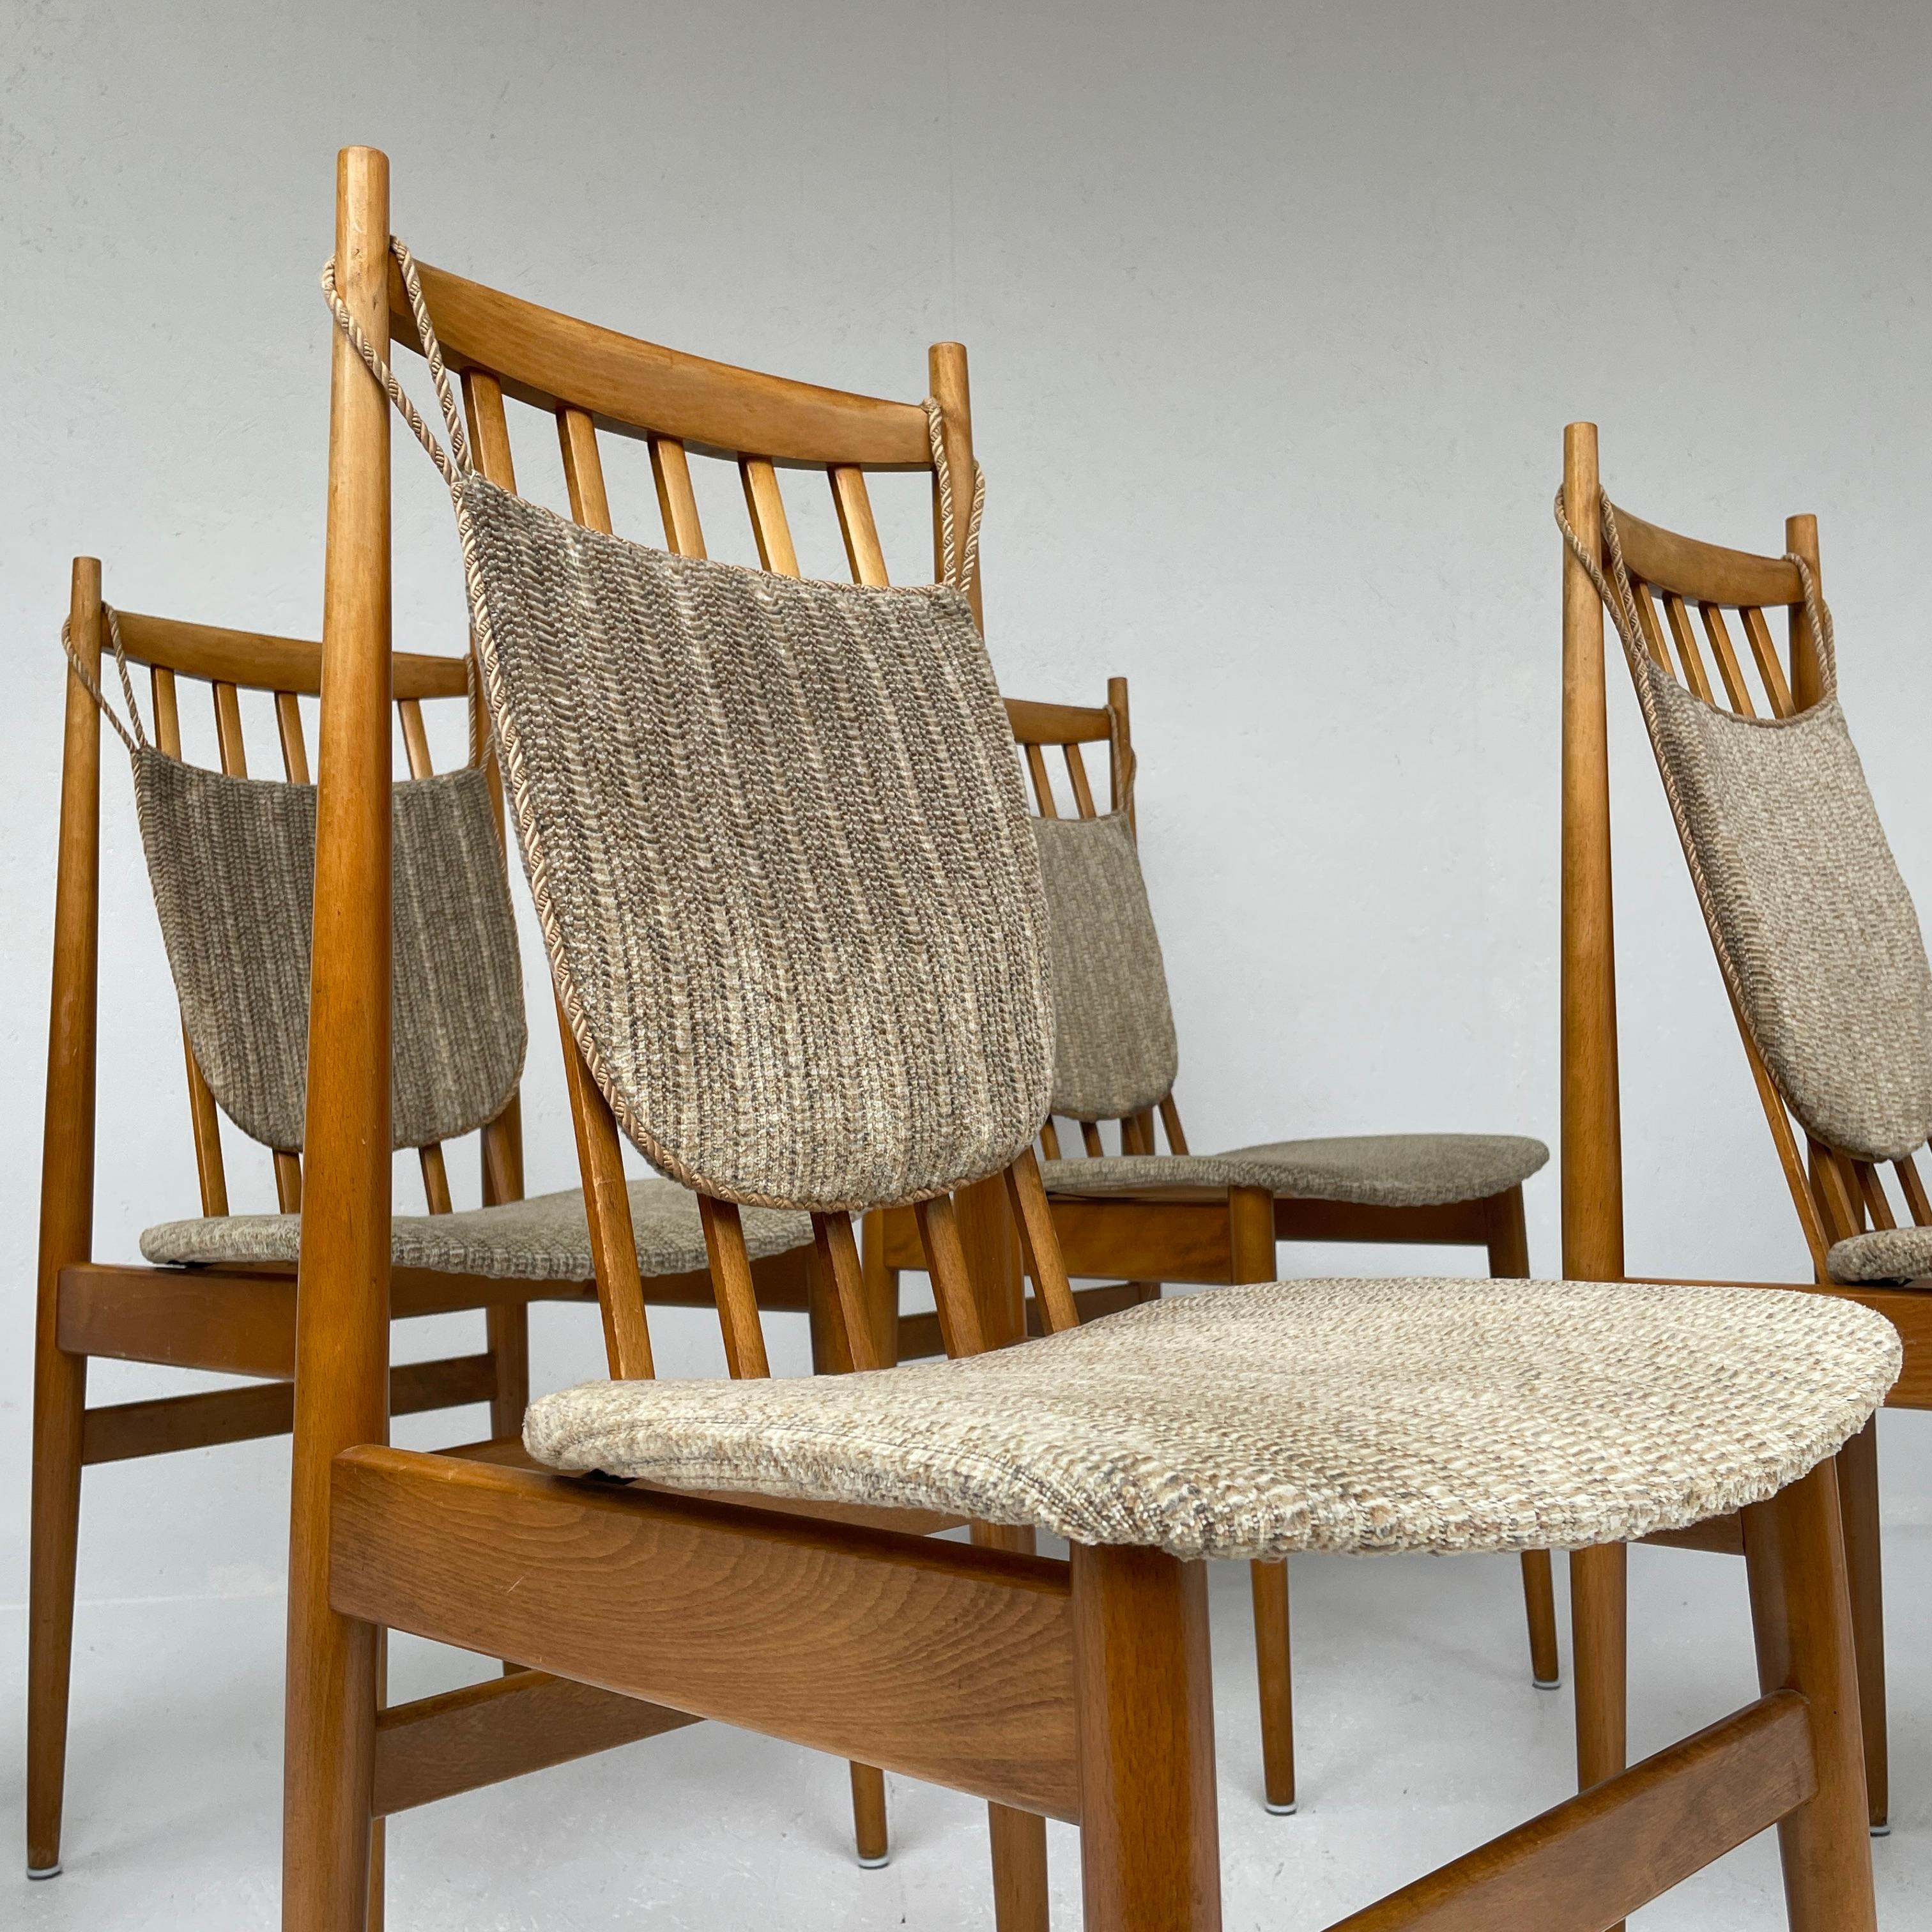 Fabric 6 Vintage Chairs by Casala